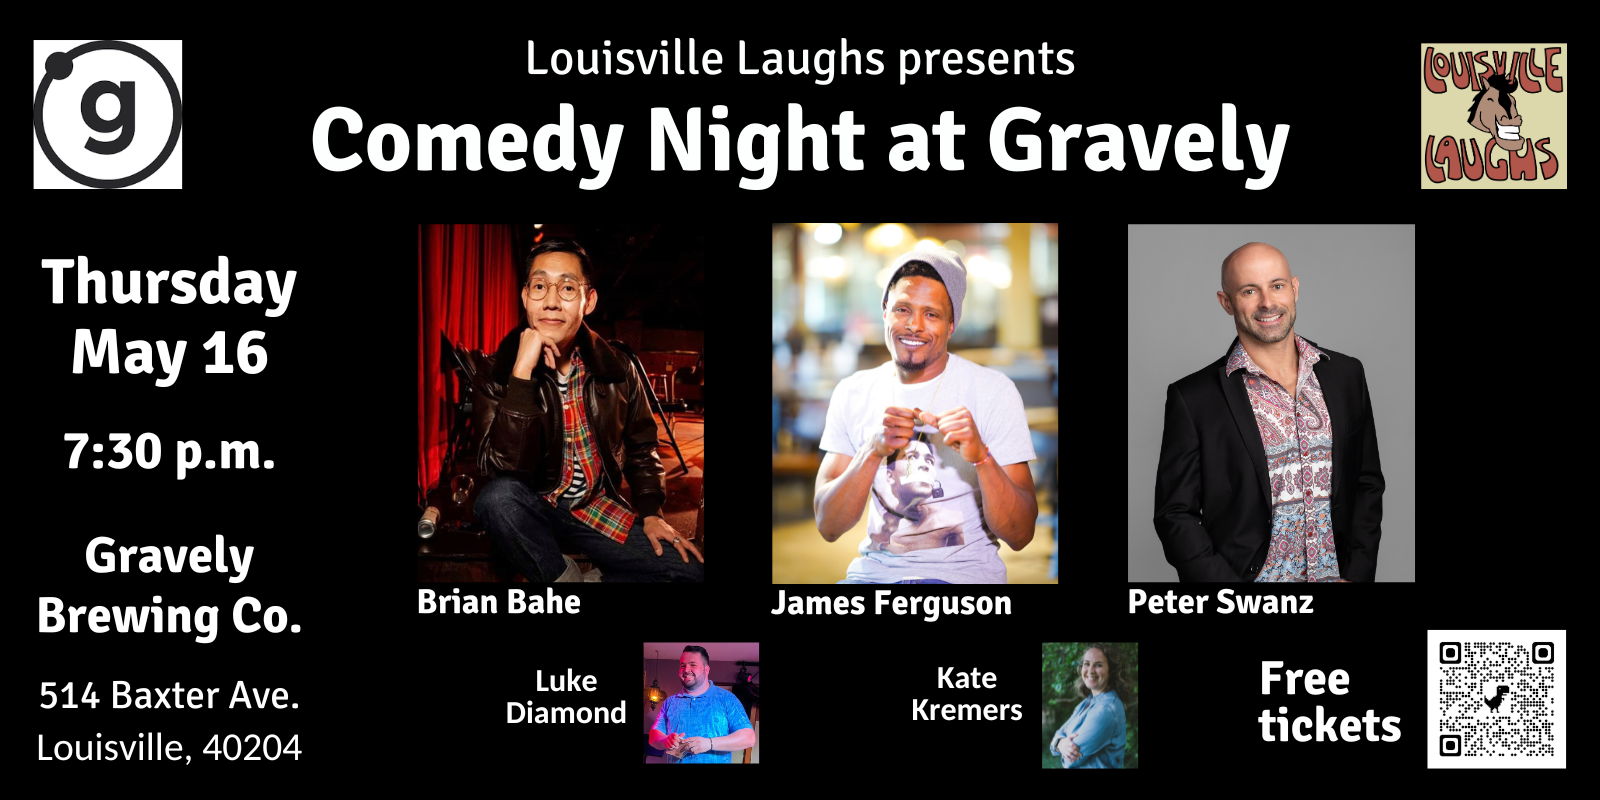 May 16 Comedy Night at Gravely promotional image